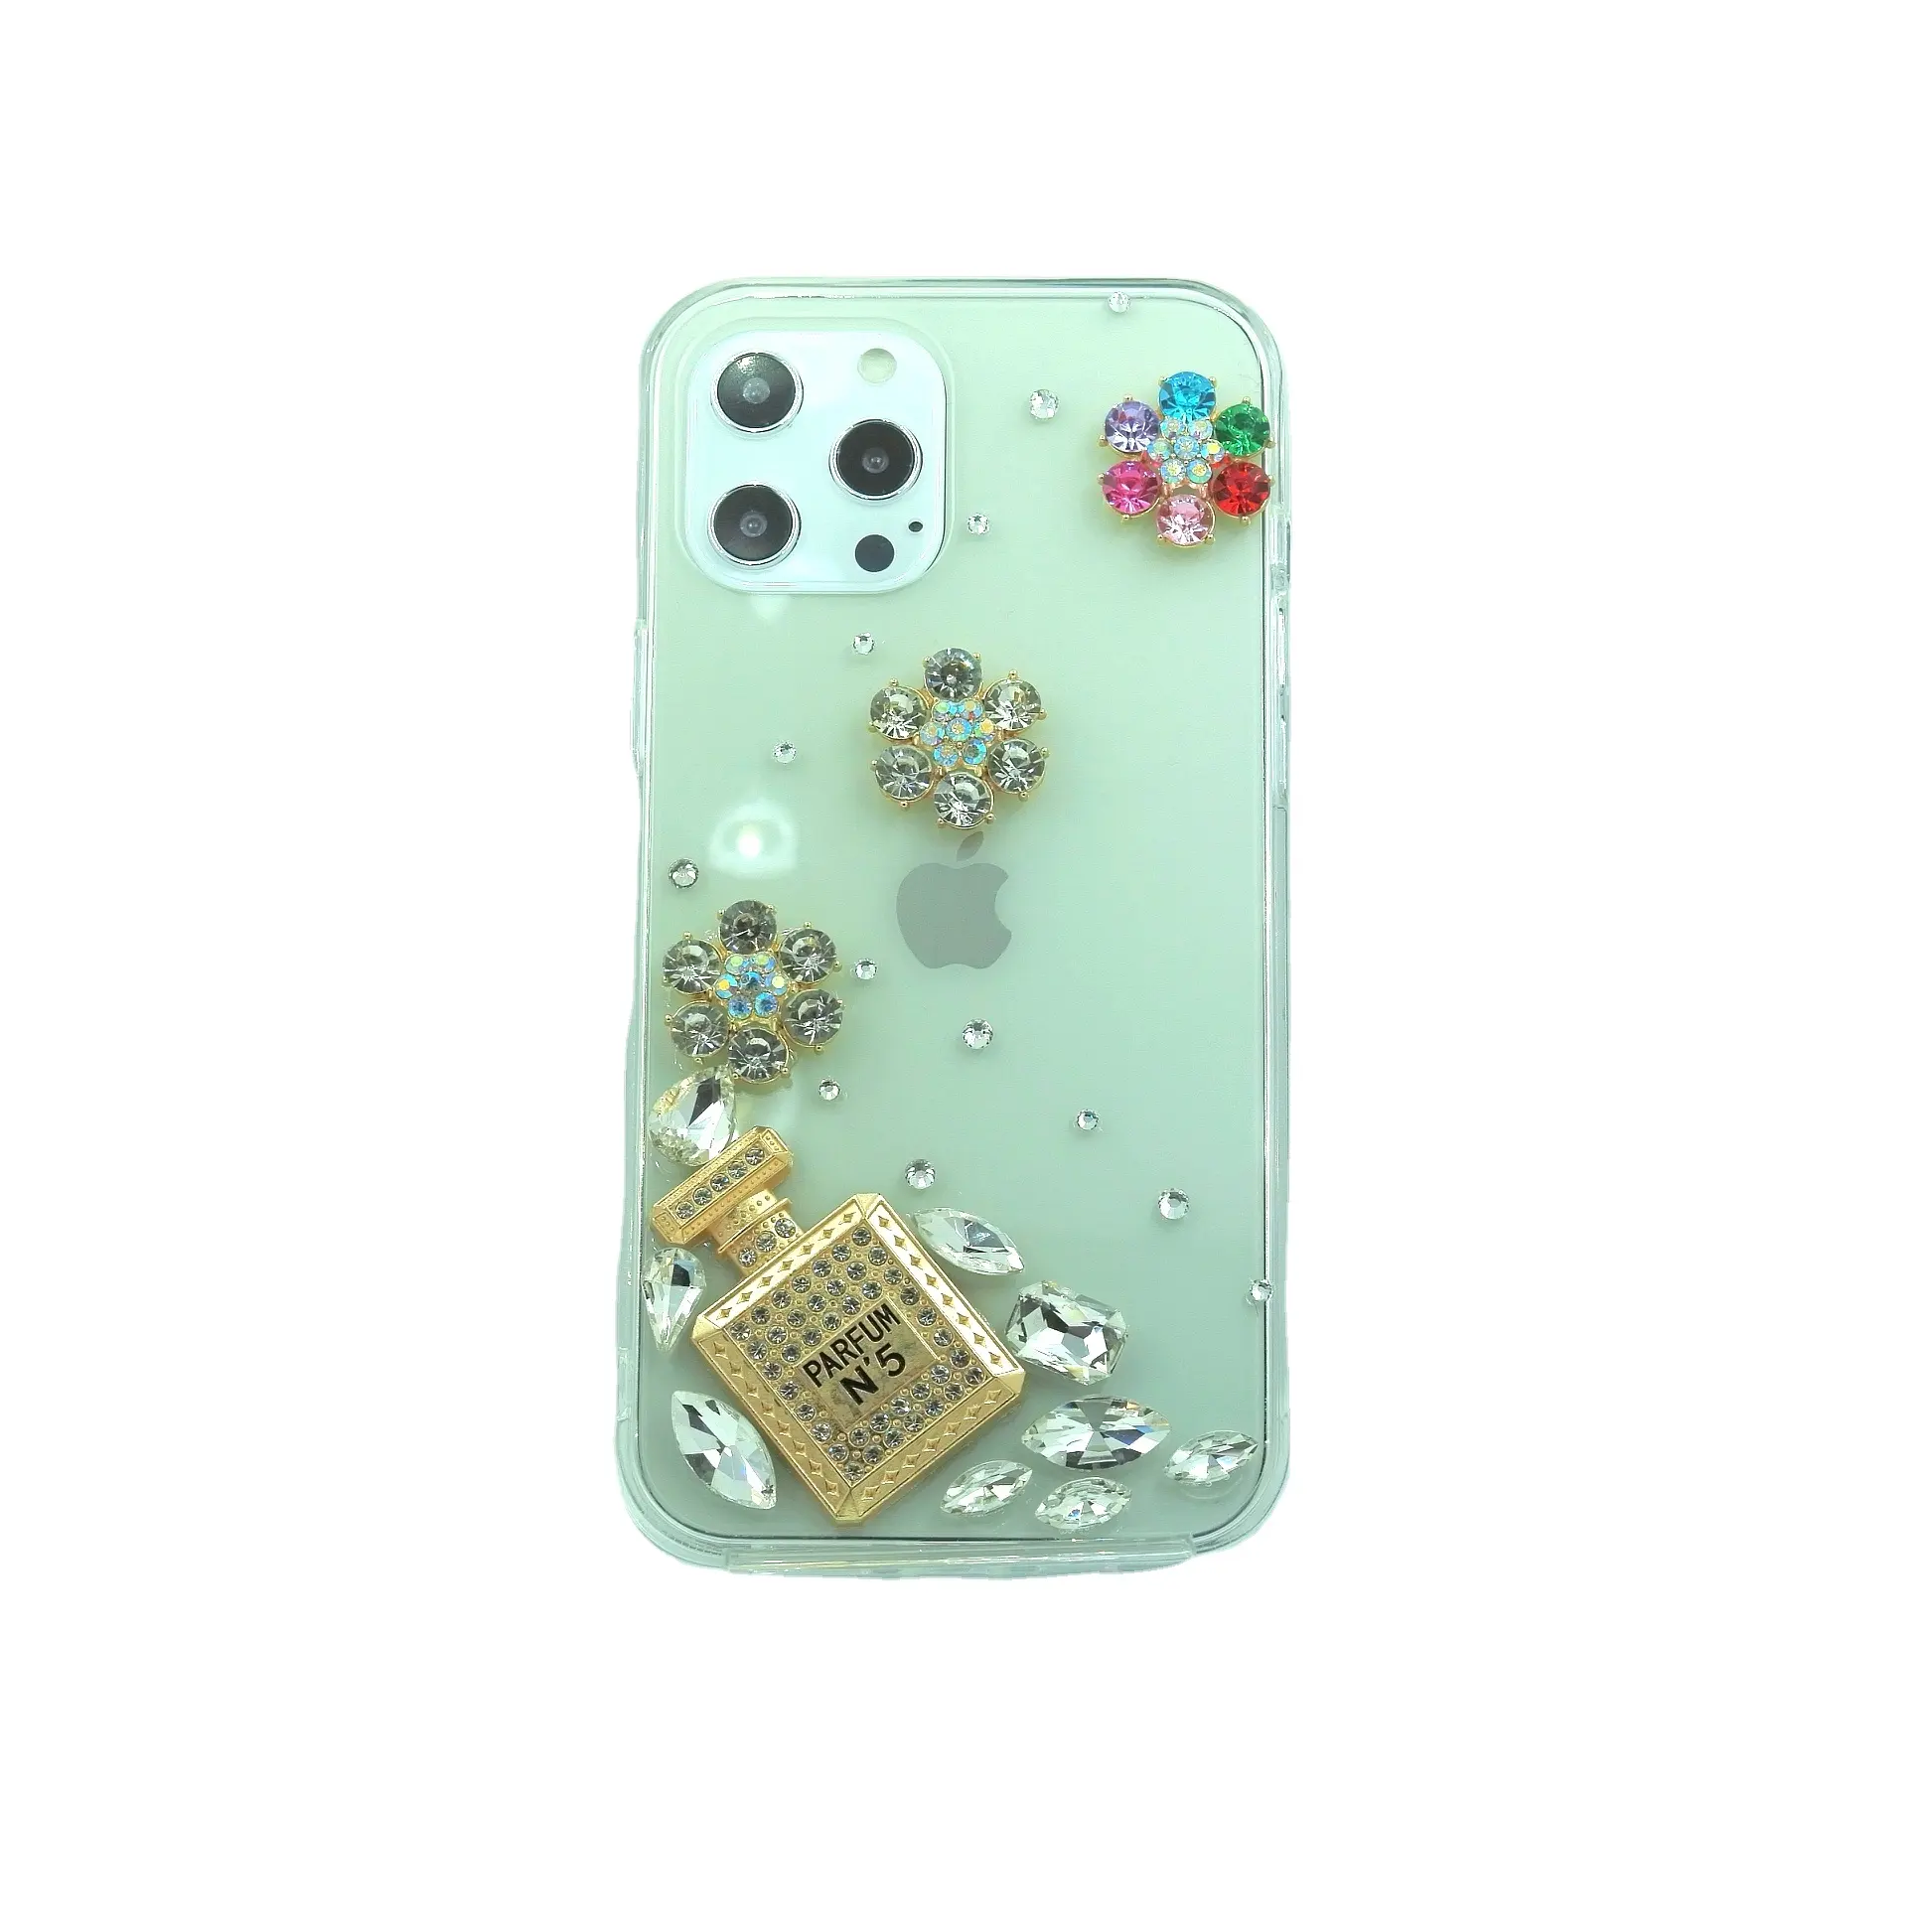 Designer phone case Phone shell for iPhone 12 glitter diamond back cover for iPhone 11 case 12Pro 12Pro Max 12